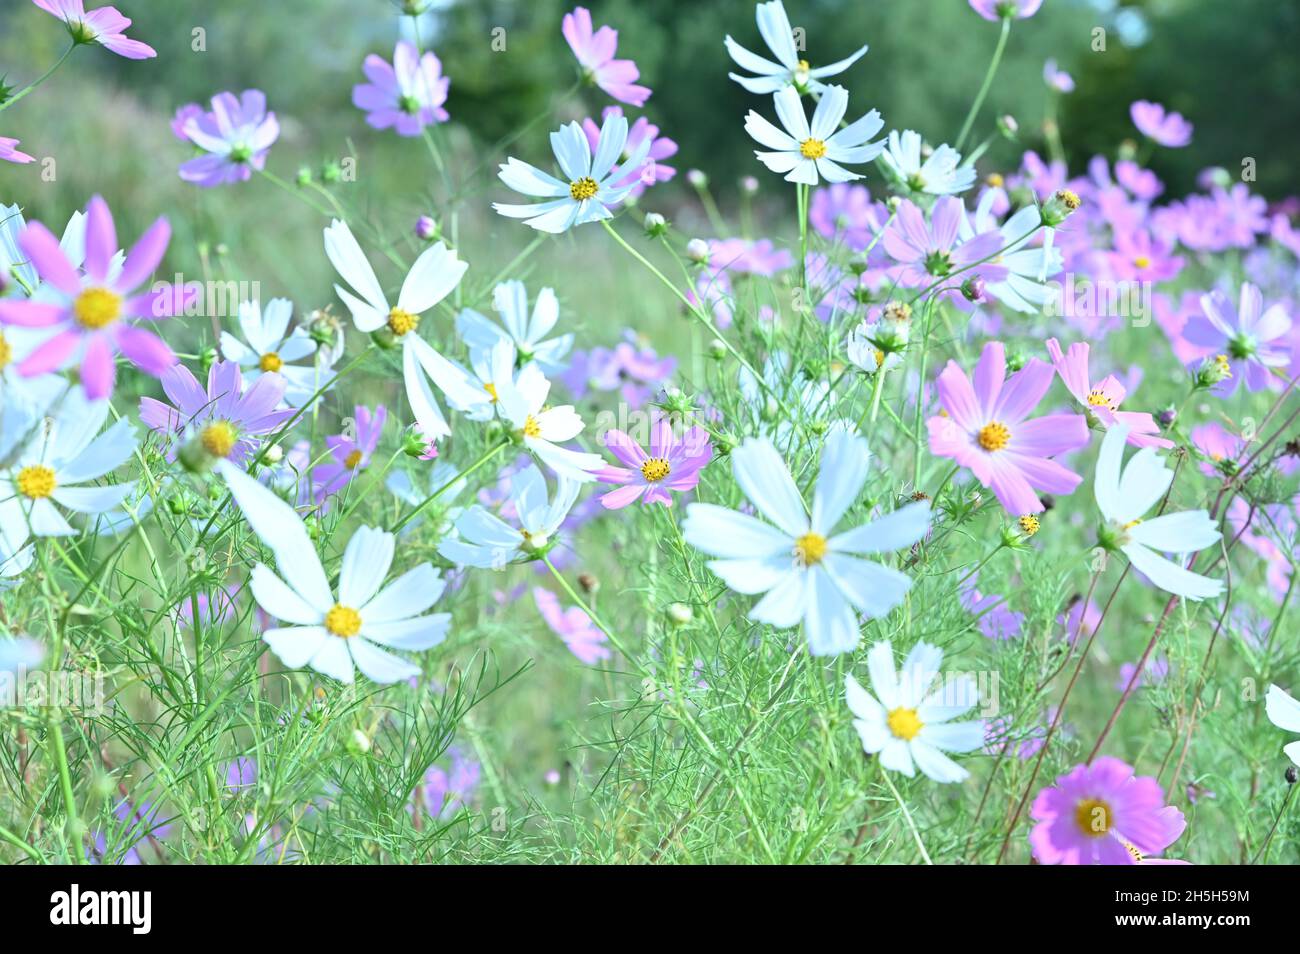 Numerous cosmos bloom beautifully. Looking at the beautiful cosmos, I can feel the beauty of nature. Stock Photo